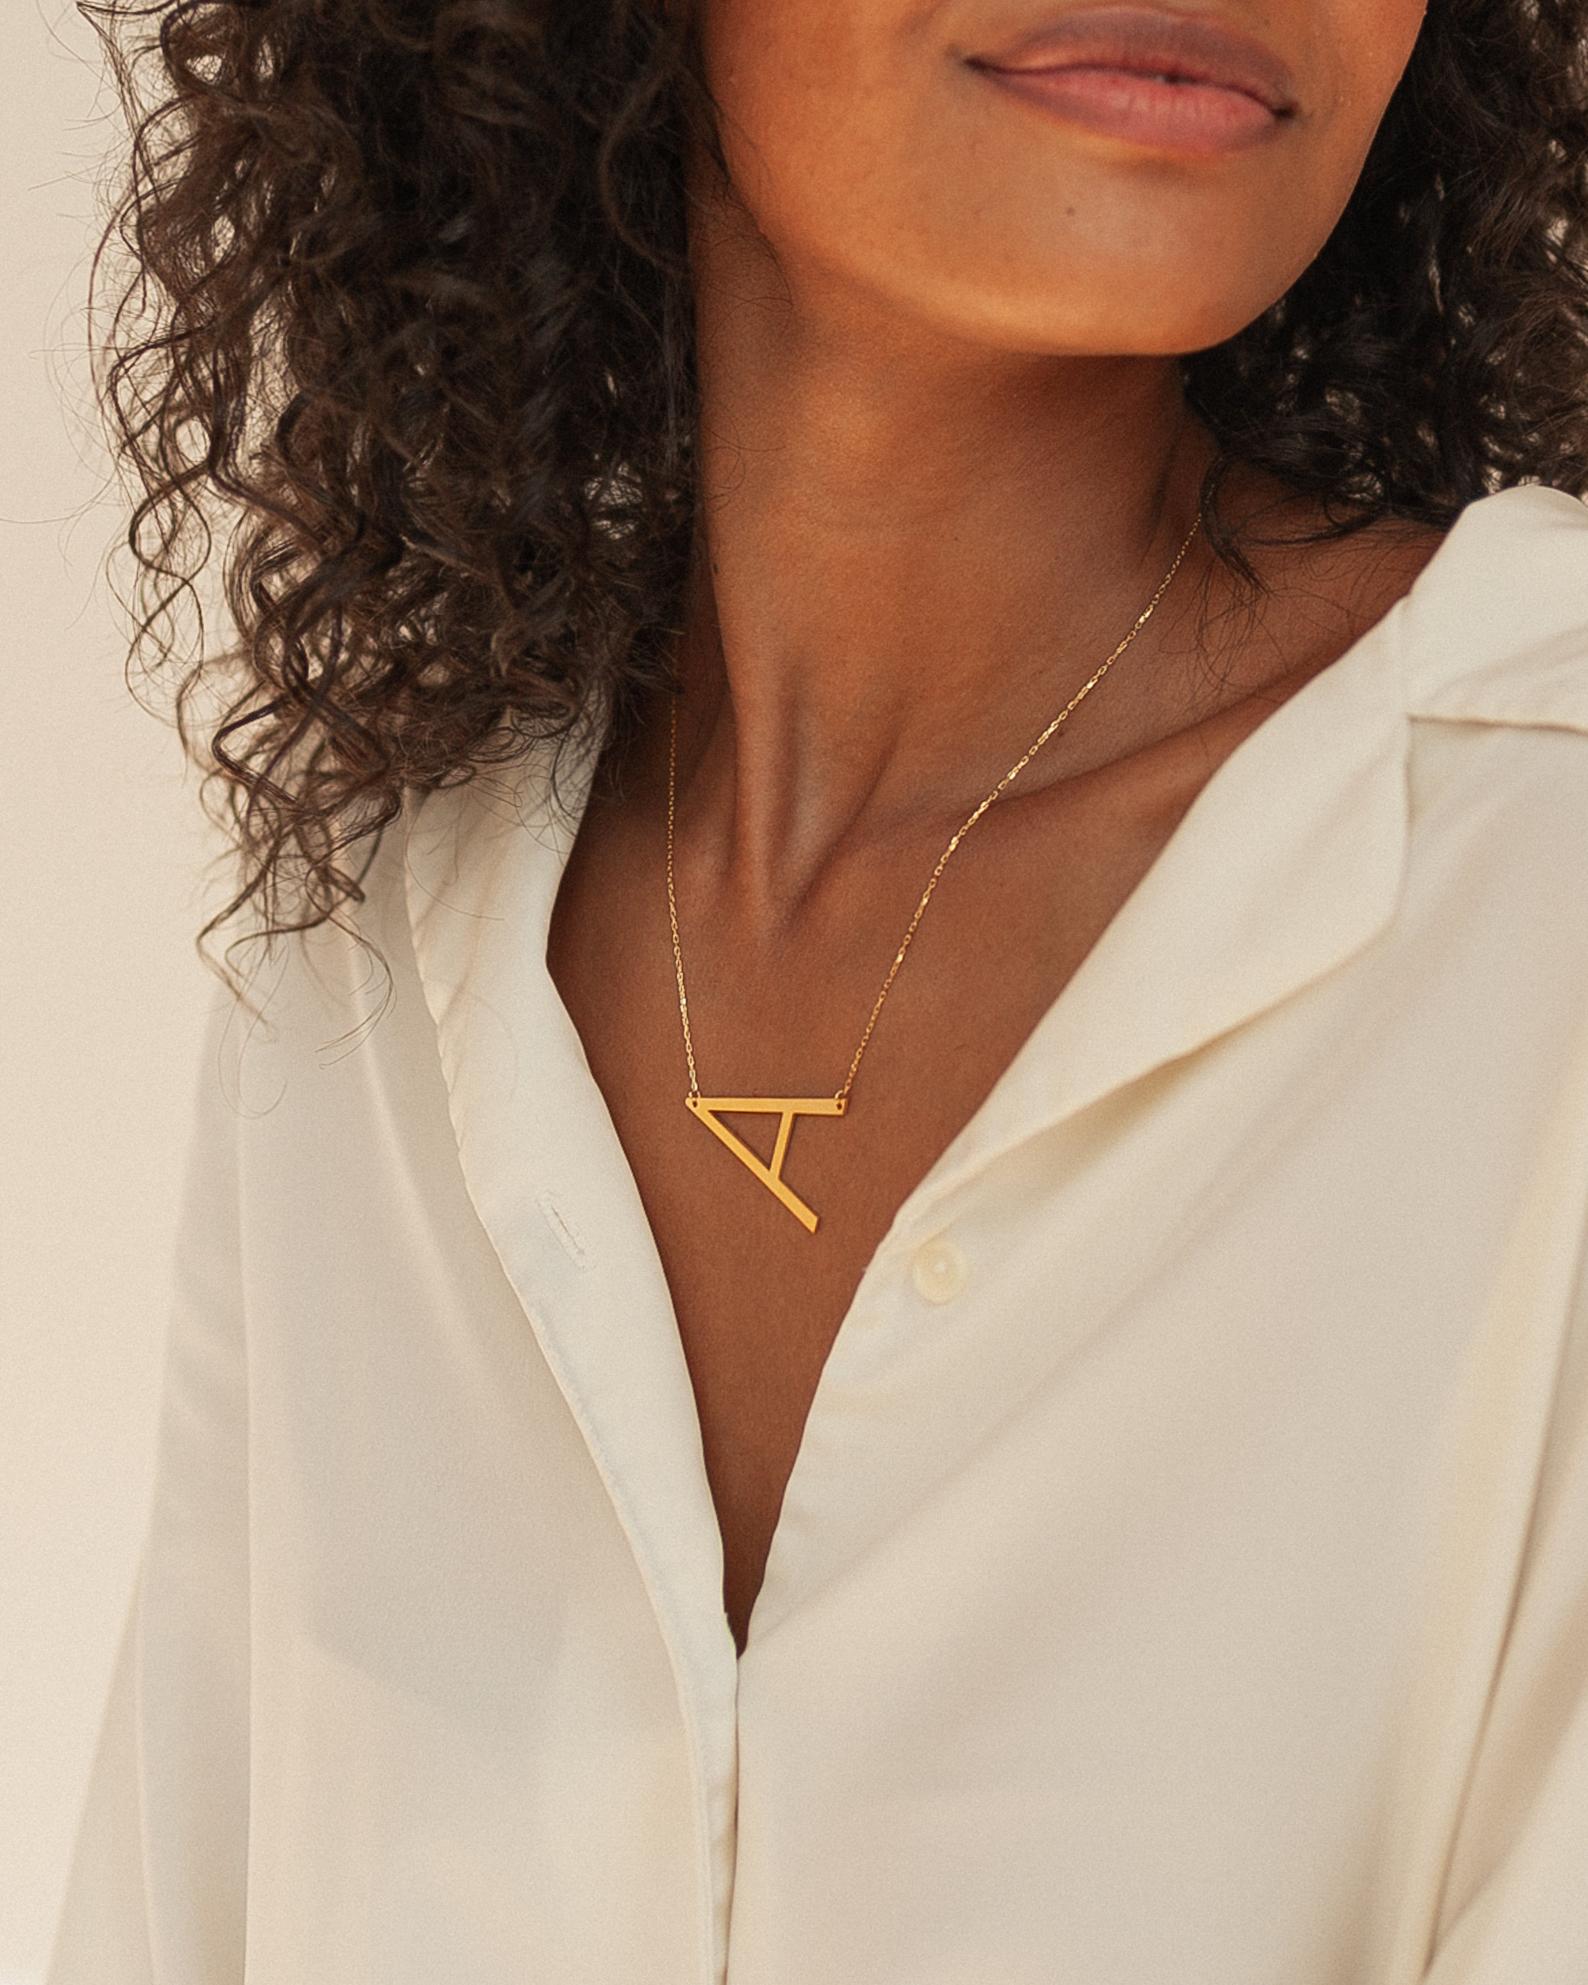 Big Letter Necklace by Caitlynminimalist Sideways Initial 